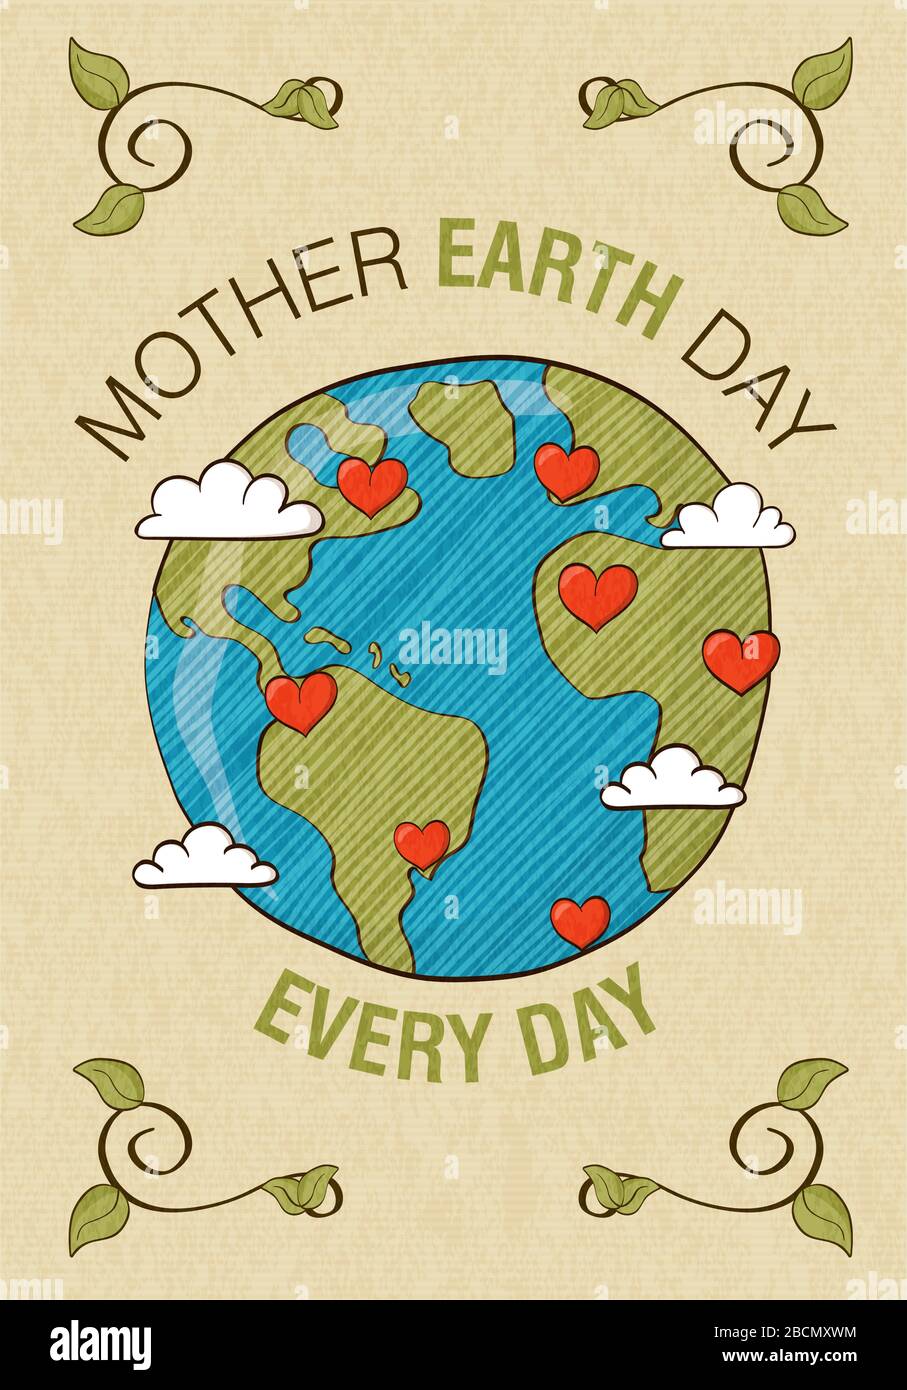 Make everyday mother earth day greeting card with heart shape worldwide for nature love concept. April 22 environment care event design, eco friendly Stock Vector